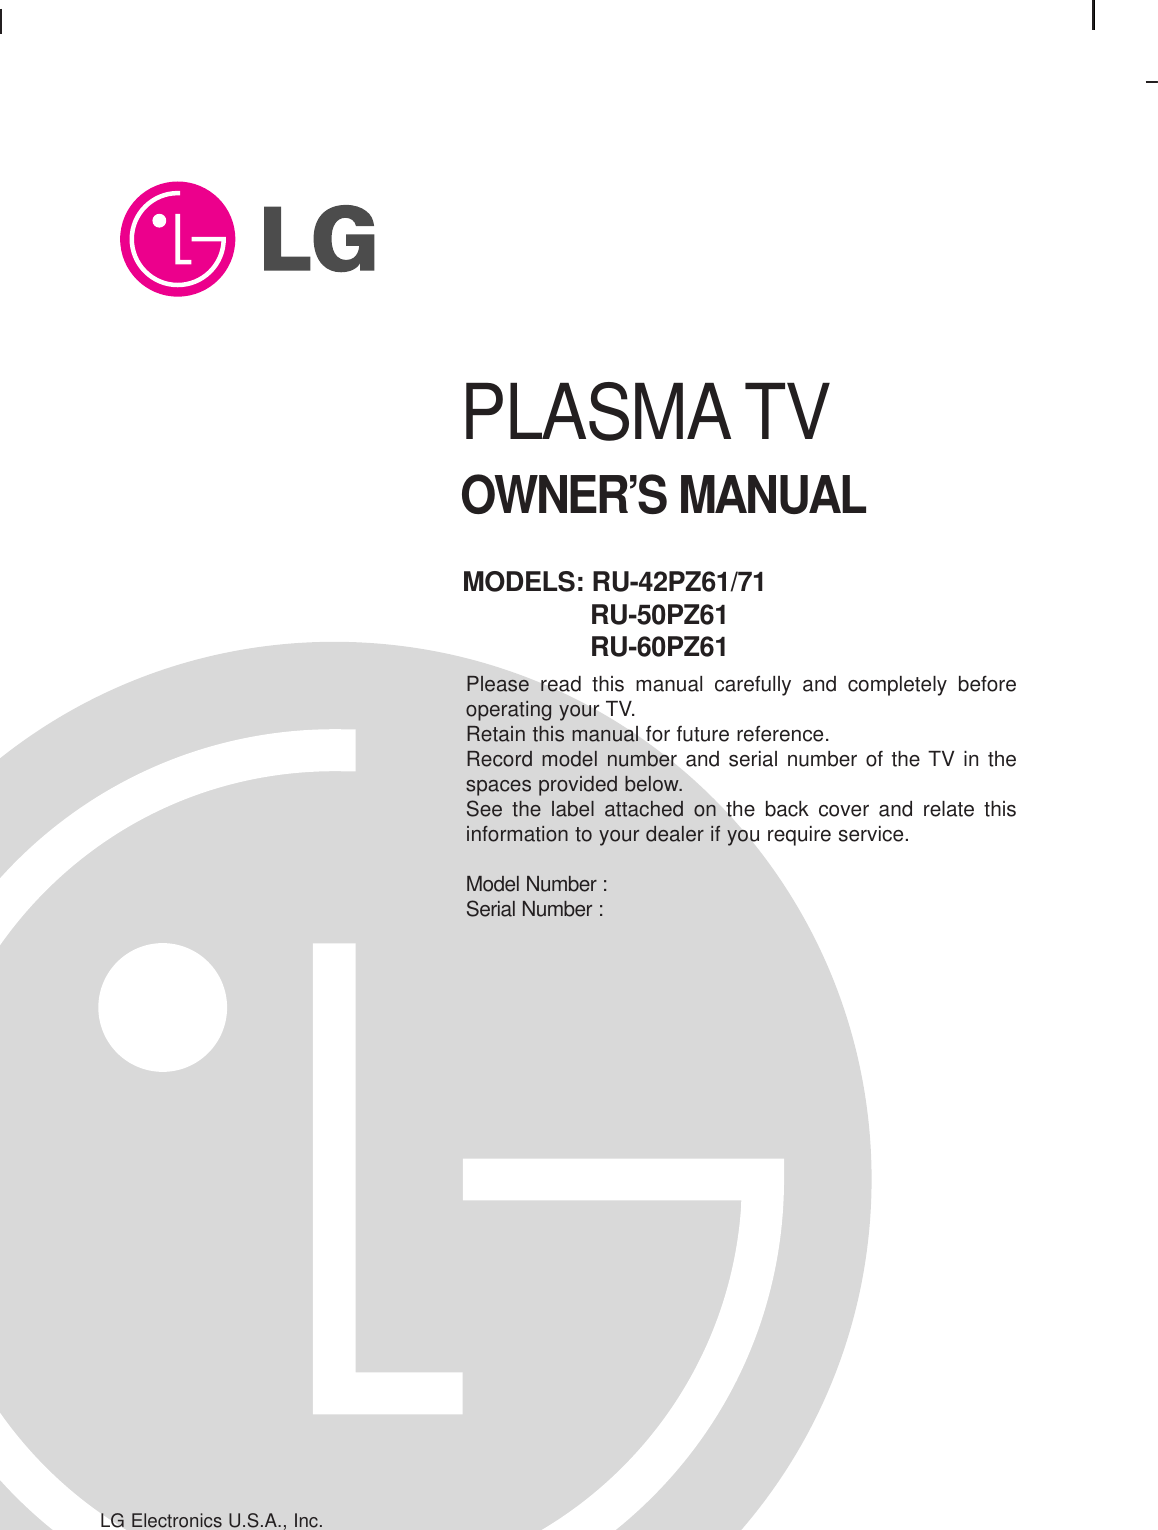 PLASMA TVOWNER’S MANUALPlease read this manual carefully and completely beforeoperating your TV. Retain this manual for future reference.Record model number and serial number of the TV in thespaces provided below. See the label attached on the back cover and relate thisinformation to your dealer if you require service.Model Number : Serial Number : MODELS: RU-42PZ61/71RU-50PZ61RU-60PZ61LG Electronics U.S.A., Inc.